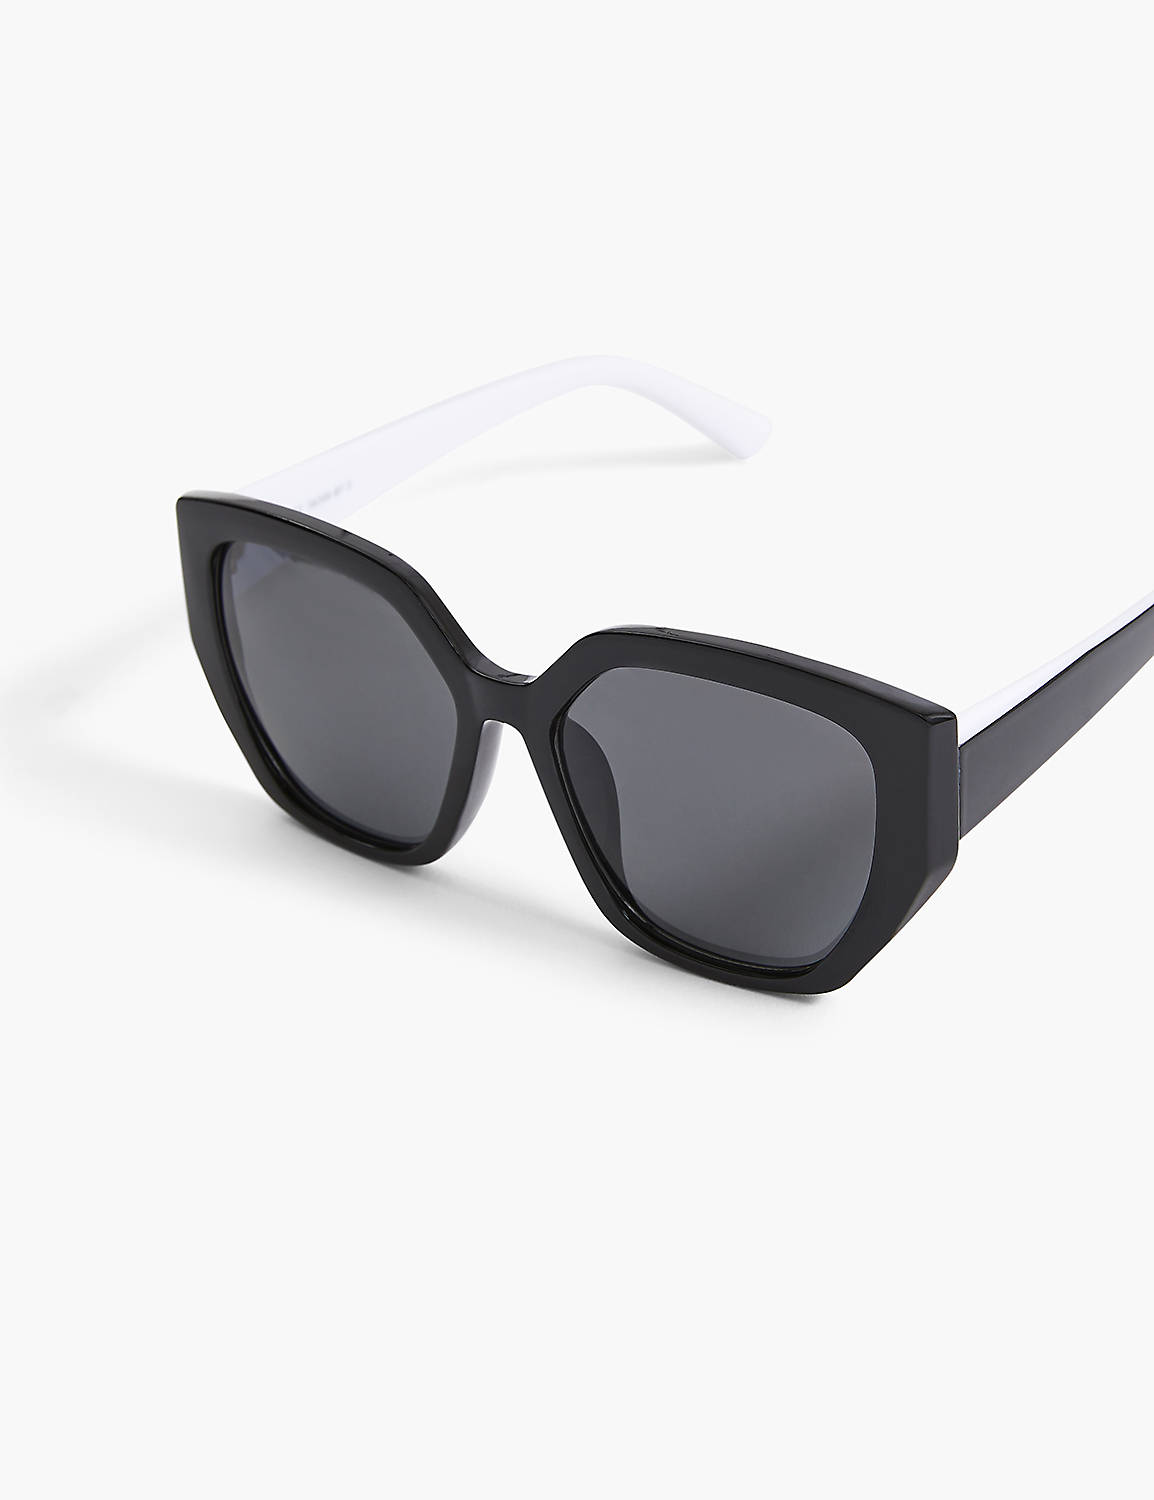 Black with White Arms Cat Eye Sungl Product Image 1